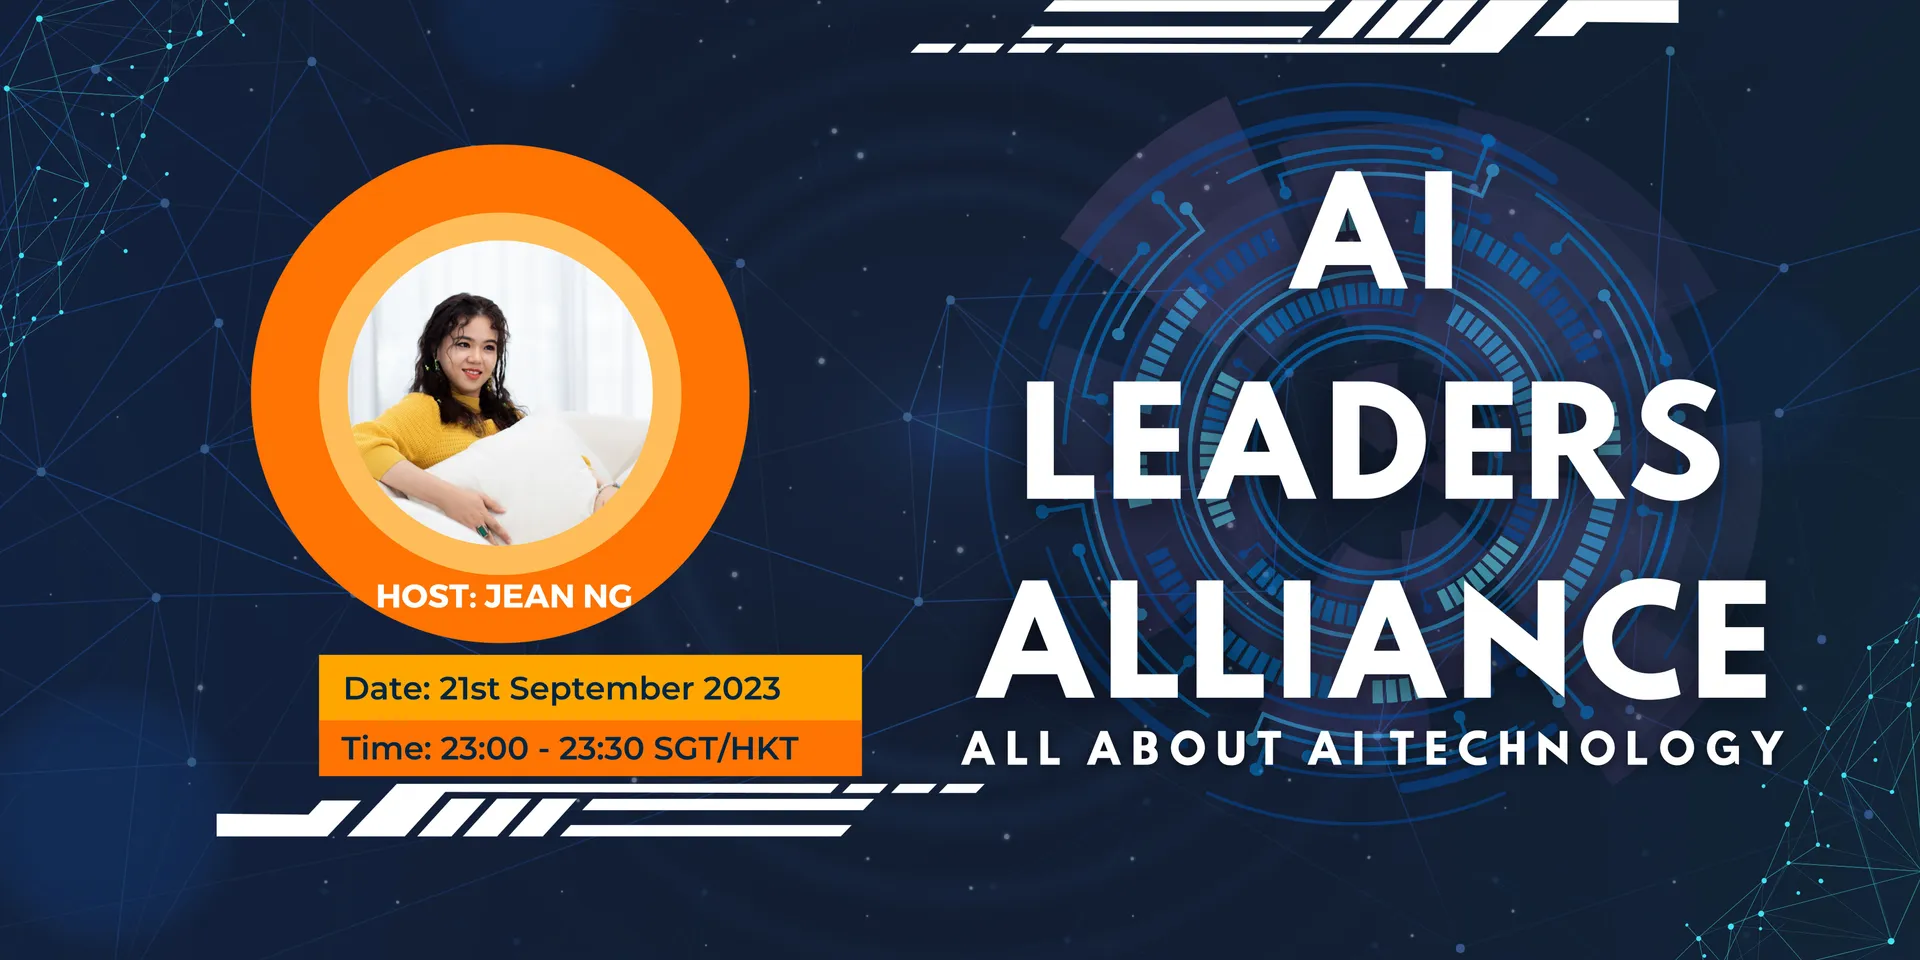 Join us this Thursday for Fireside Chats with AI Leaders! 🔥

AILA (Artificial Intelligence Leaders Alliance) is excited to host Fireside Chats #02, bringing together AI enthusiasts and experts for an engaging and insightful discussion.

Grab your favorite beverage from the comfort of your home and join us on Entre platform for an interactive chat with some of the brightest minds in the AI industry.

joinentre.com/event/adde7417-b968-467e-a5b5-4f55e0e0acfc

#AI #AILA #FiresideChats